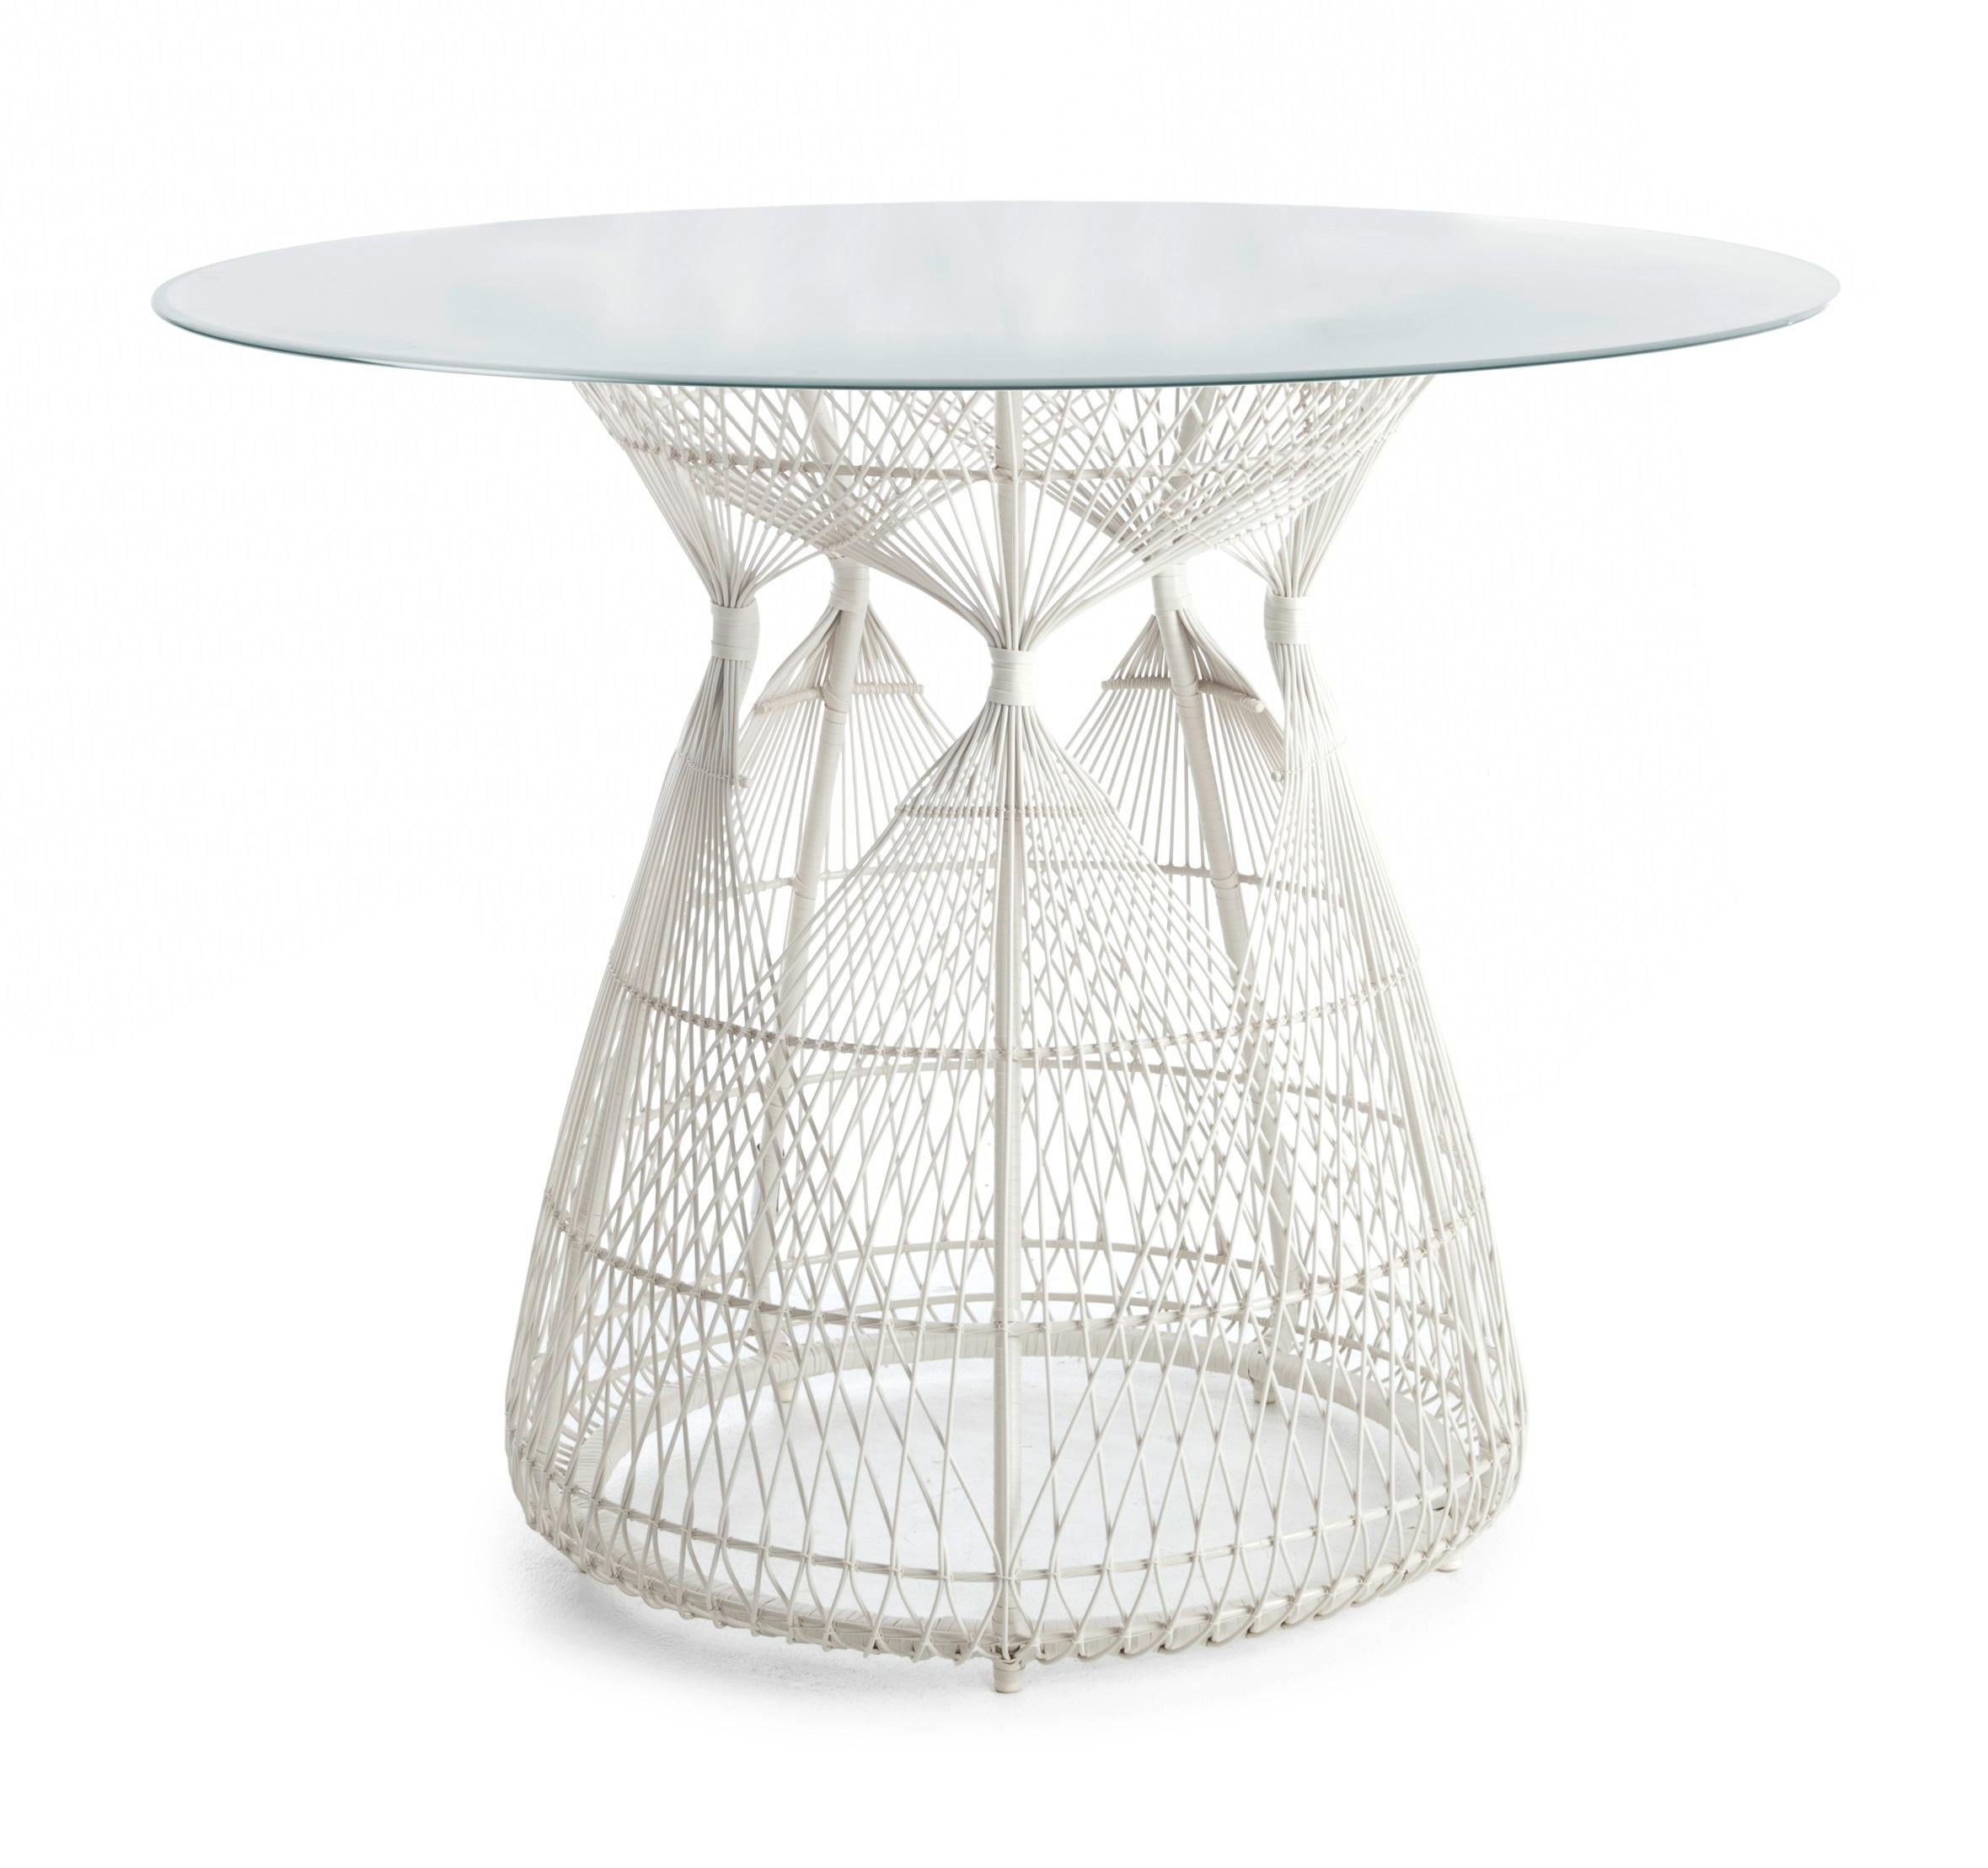 Hagia dining table by Kenneth Cobonpue
Materials: Polyethelene, nylon. Steel. Glass. 
Also available in other colors. 
Dimensions: 
Glass diameter 100cm x height 12mm
Table diameter 61 cm x height 74 cm 

Bask in Hagia’s regal luxury and